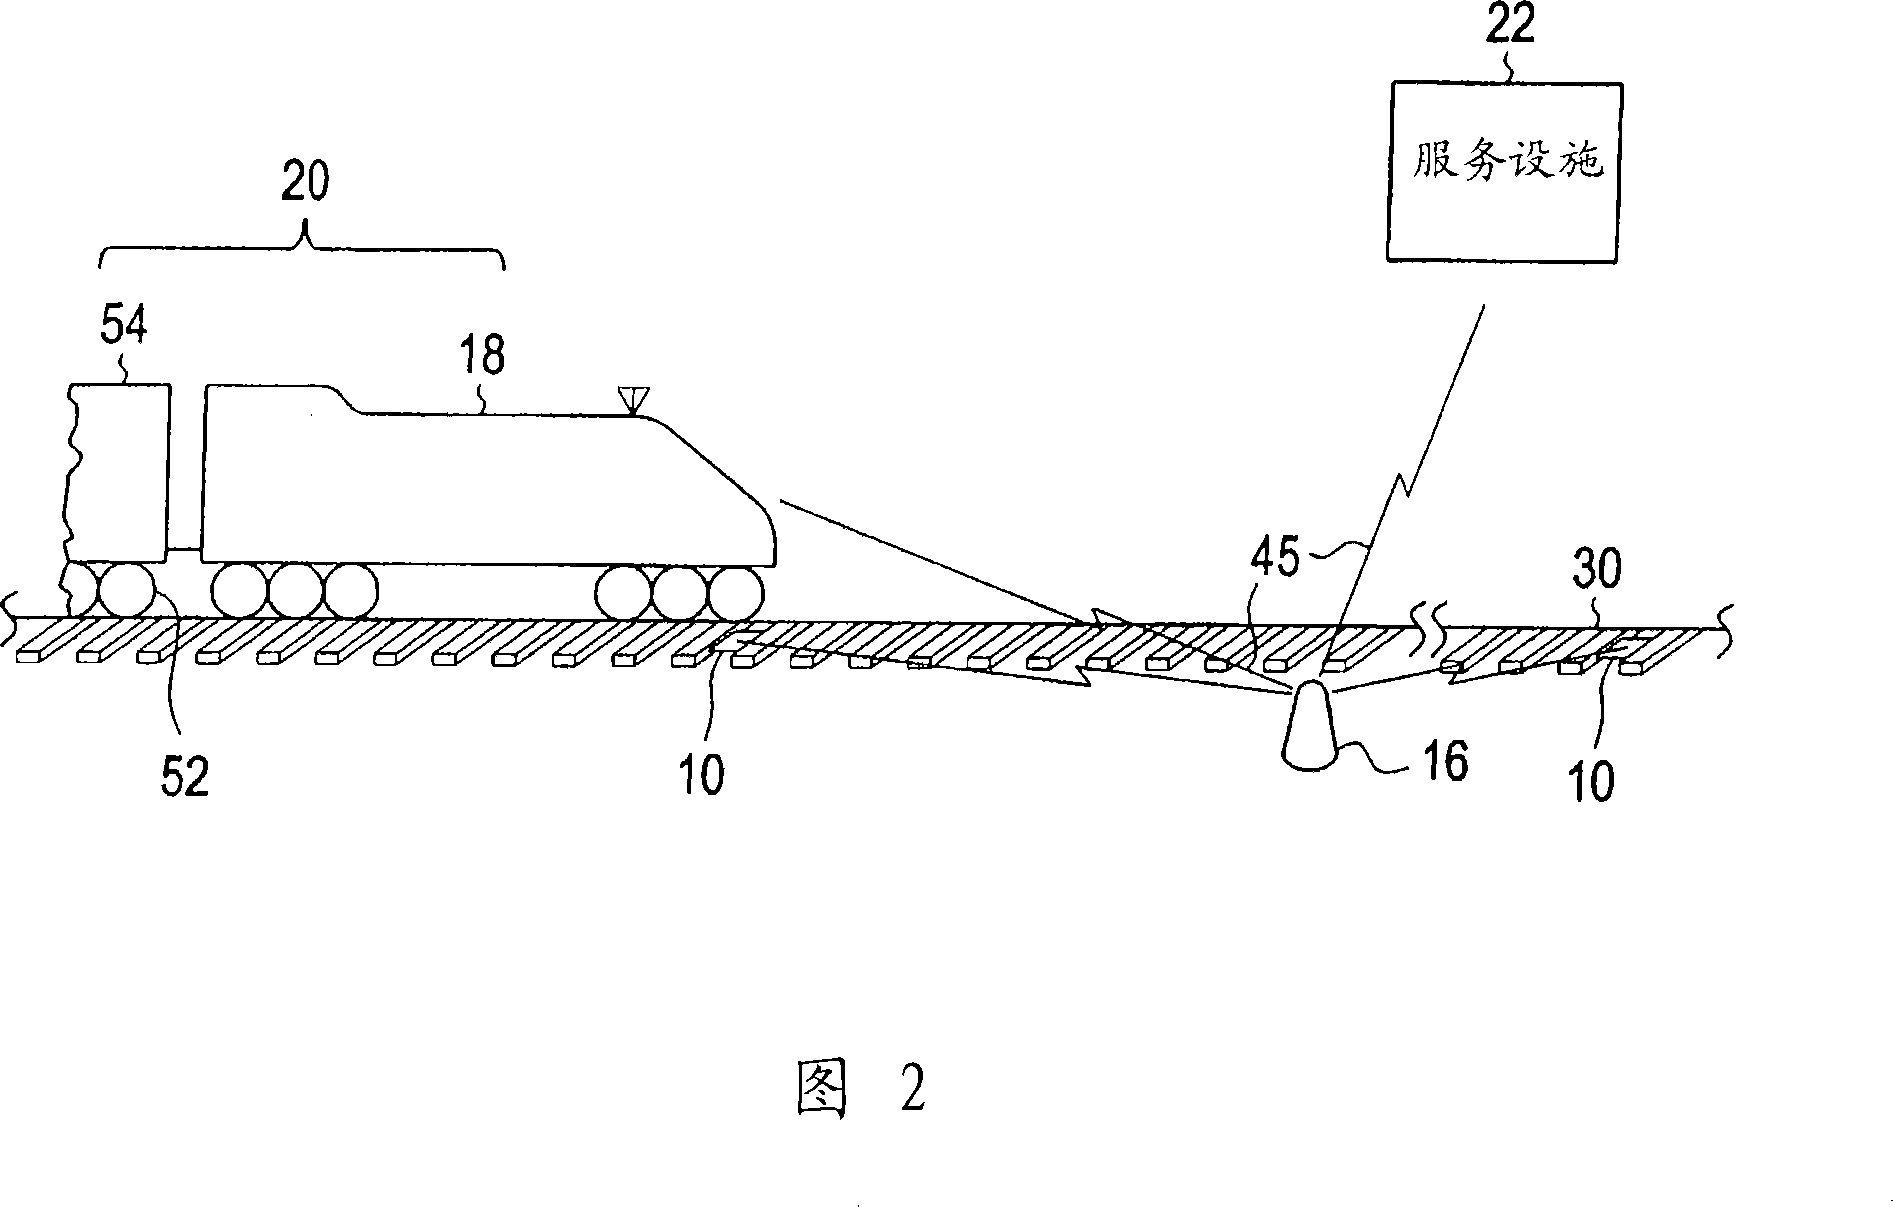 System and method for detecting a change or an obstruction to a railway track